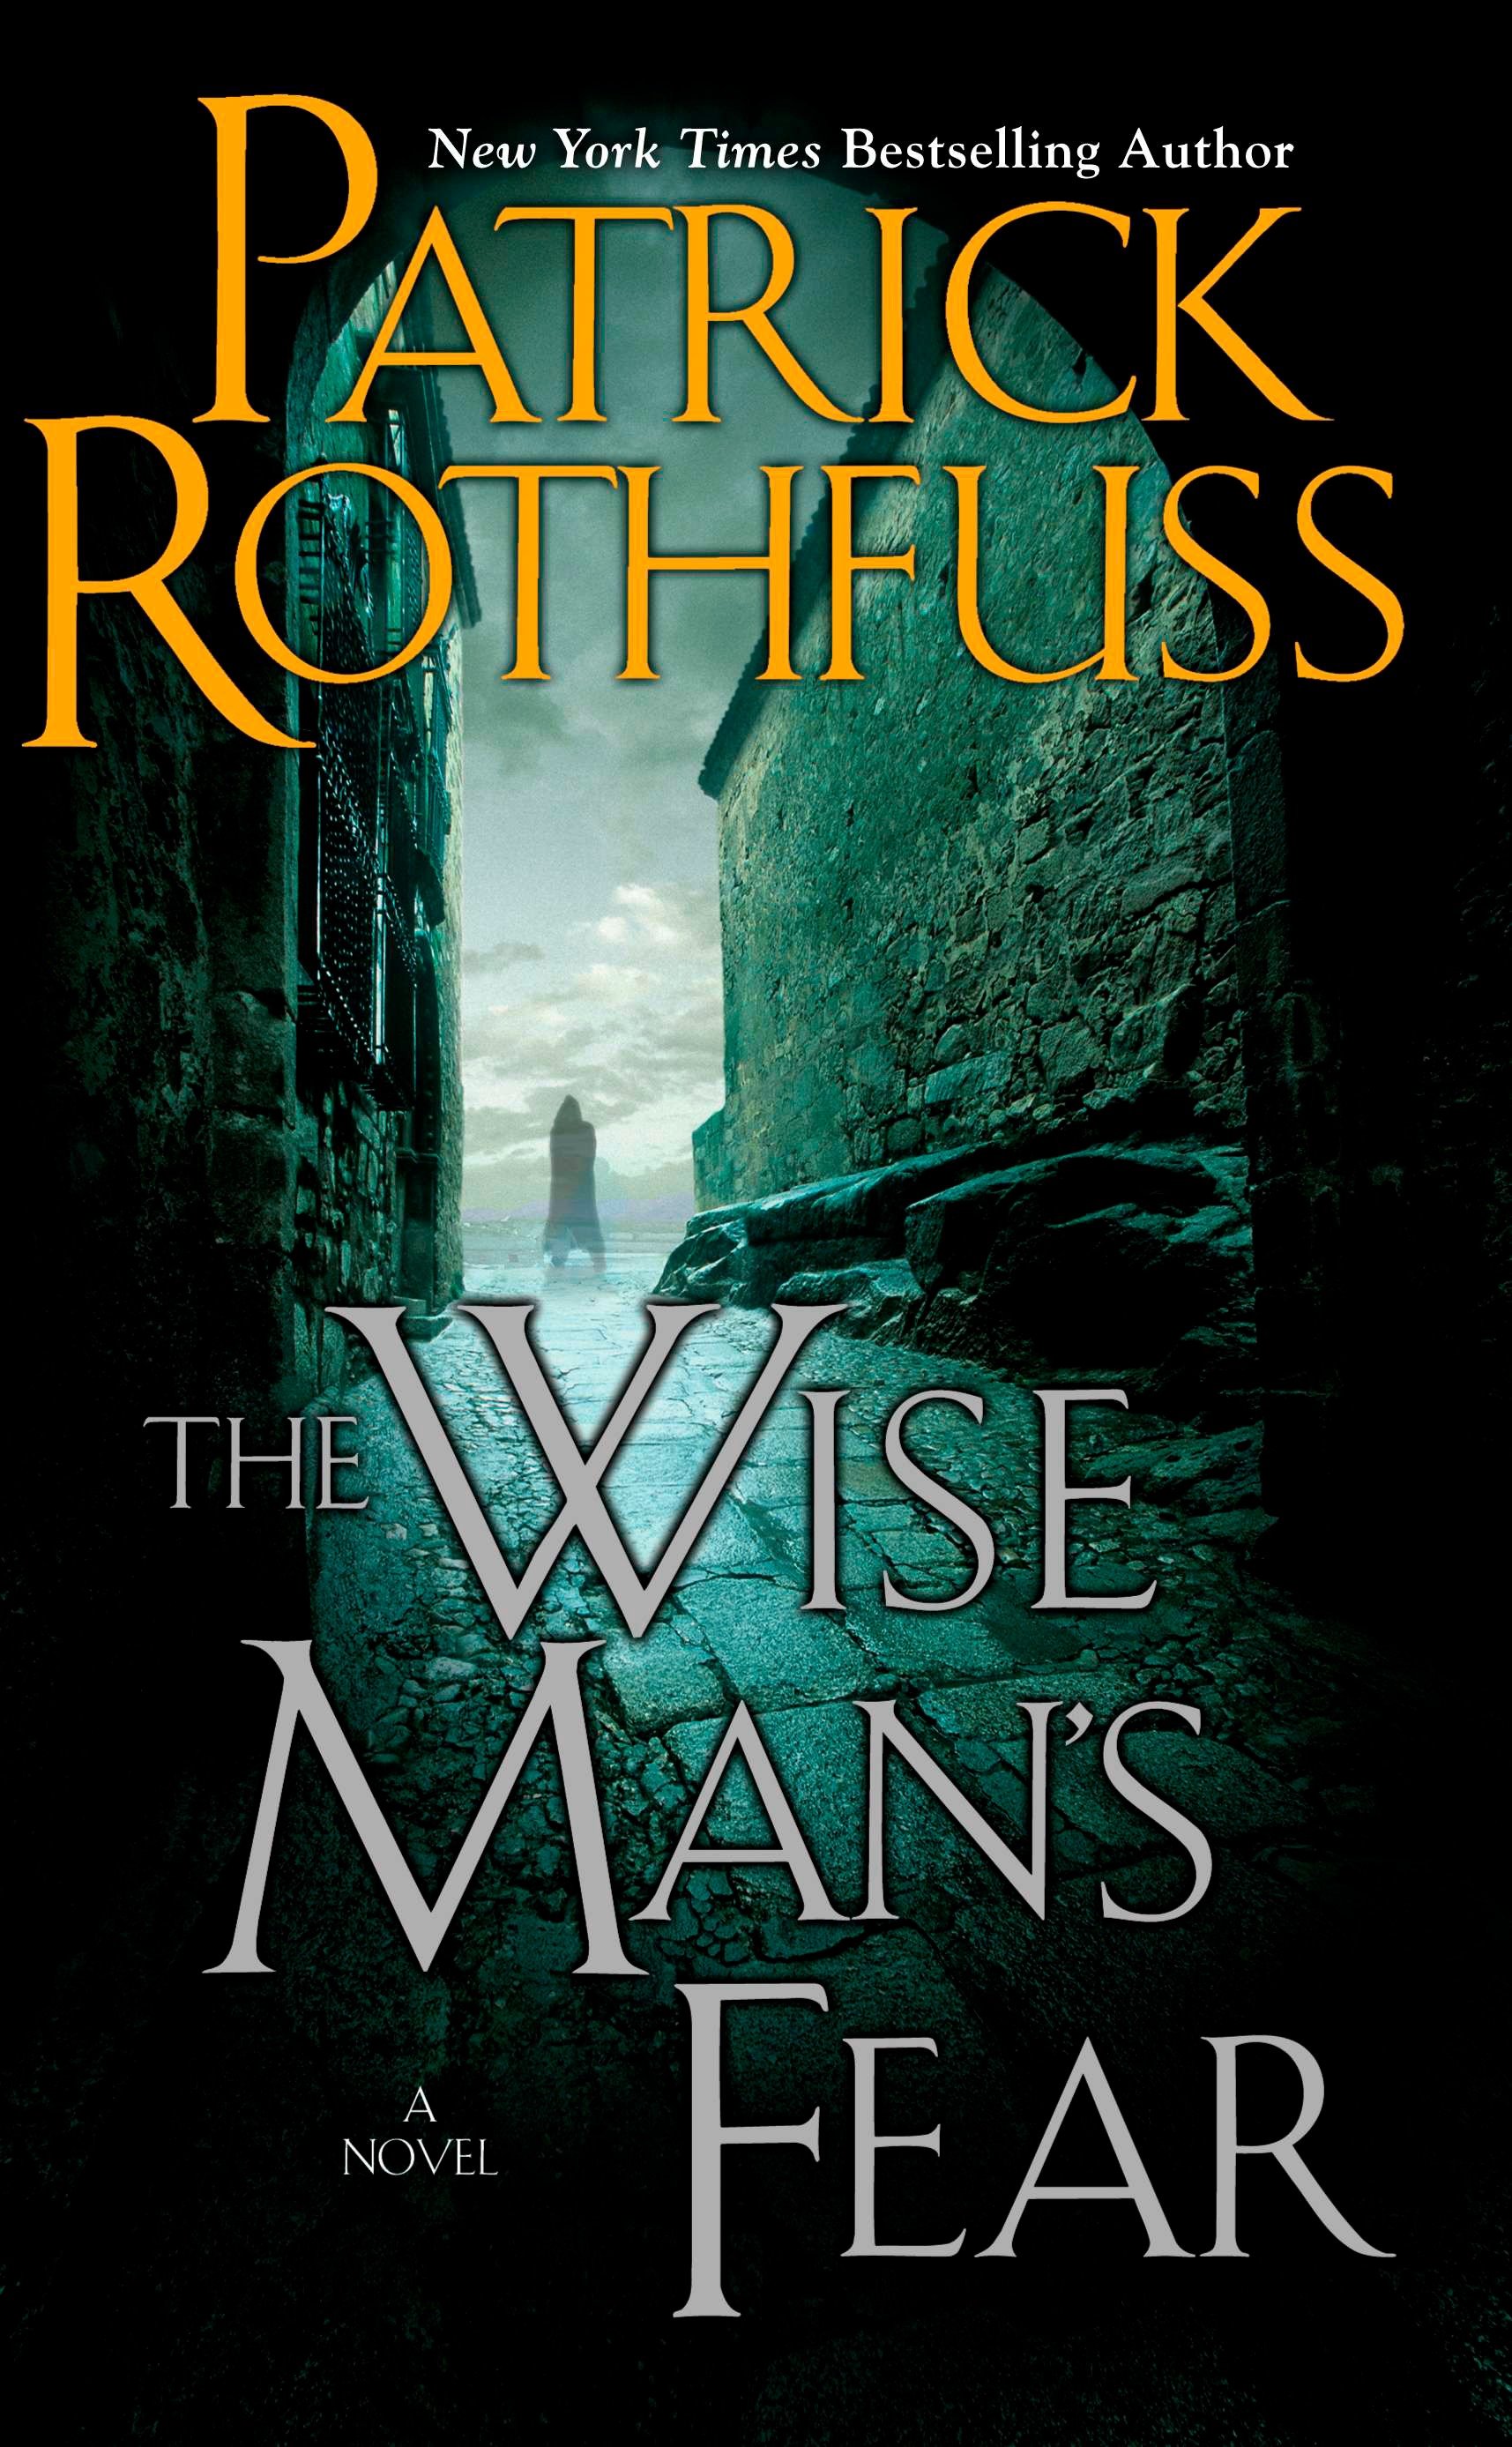 The wise man's fear cover image